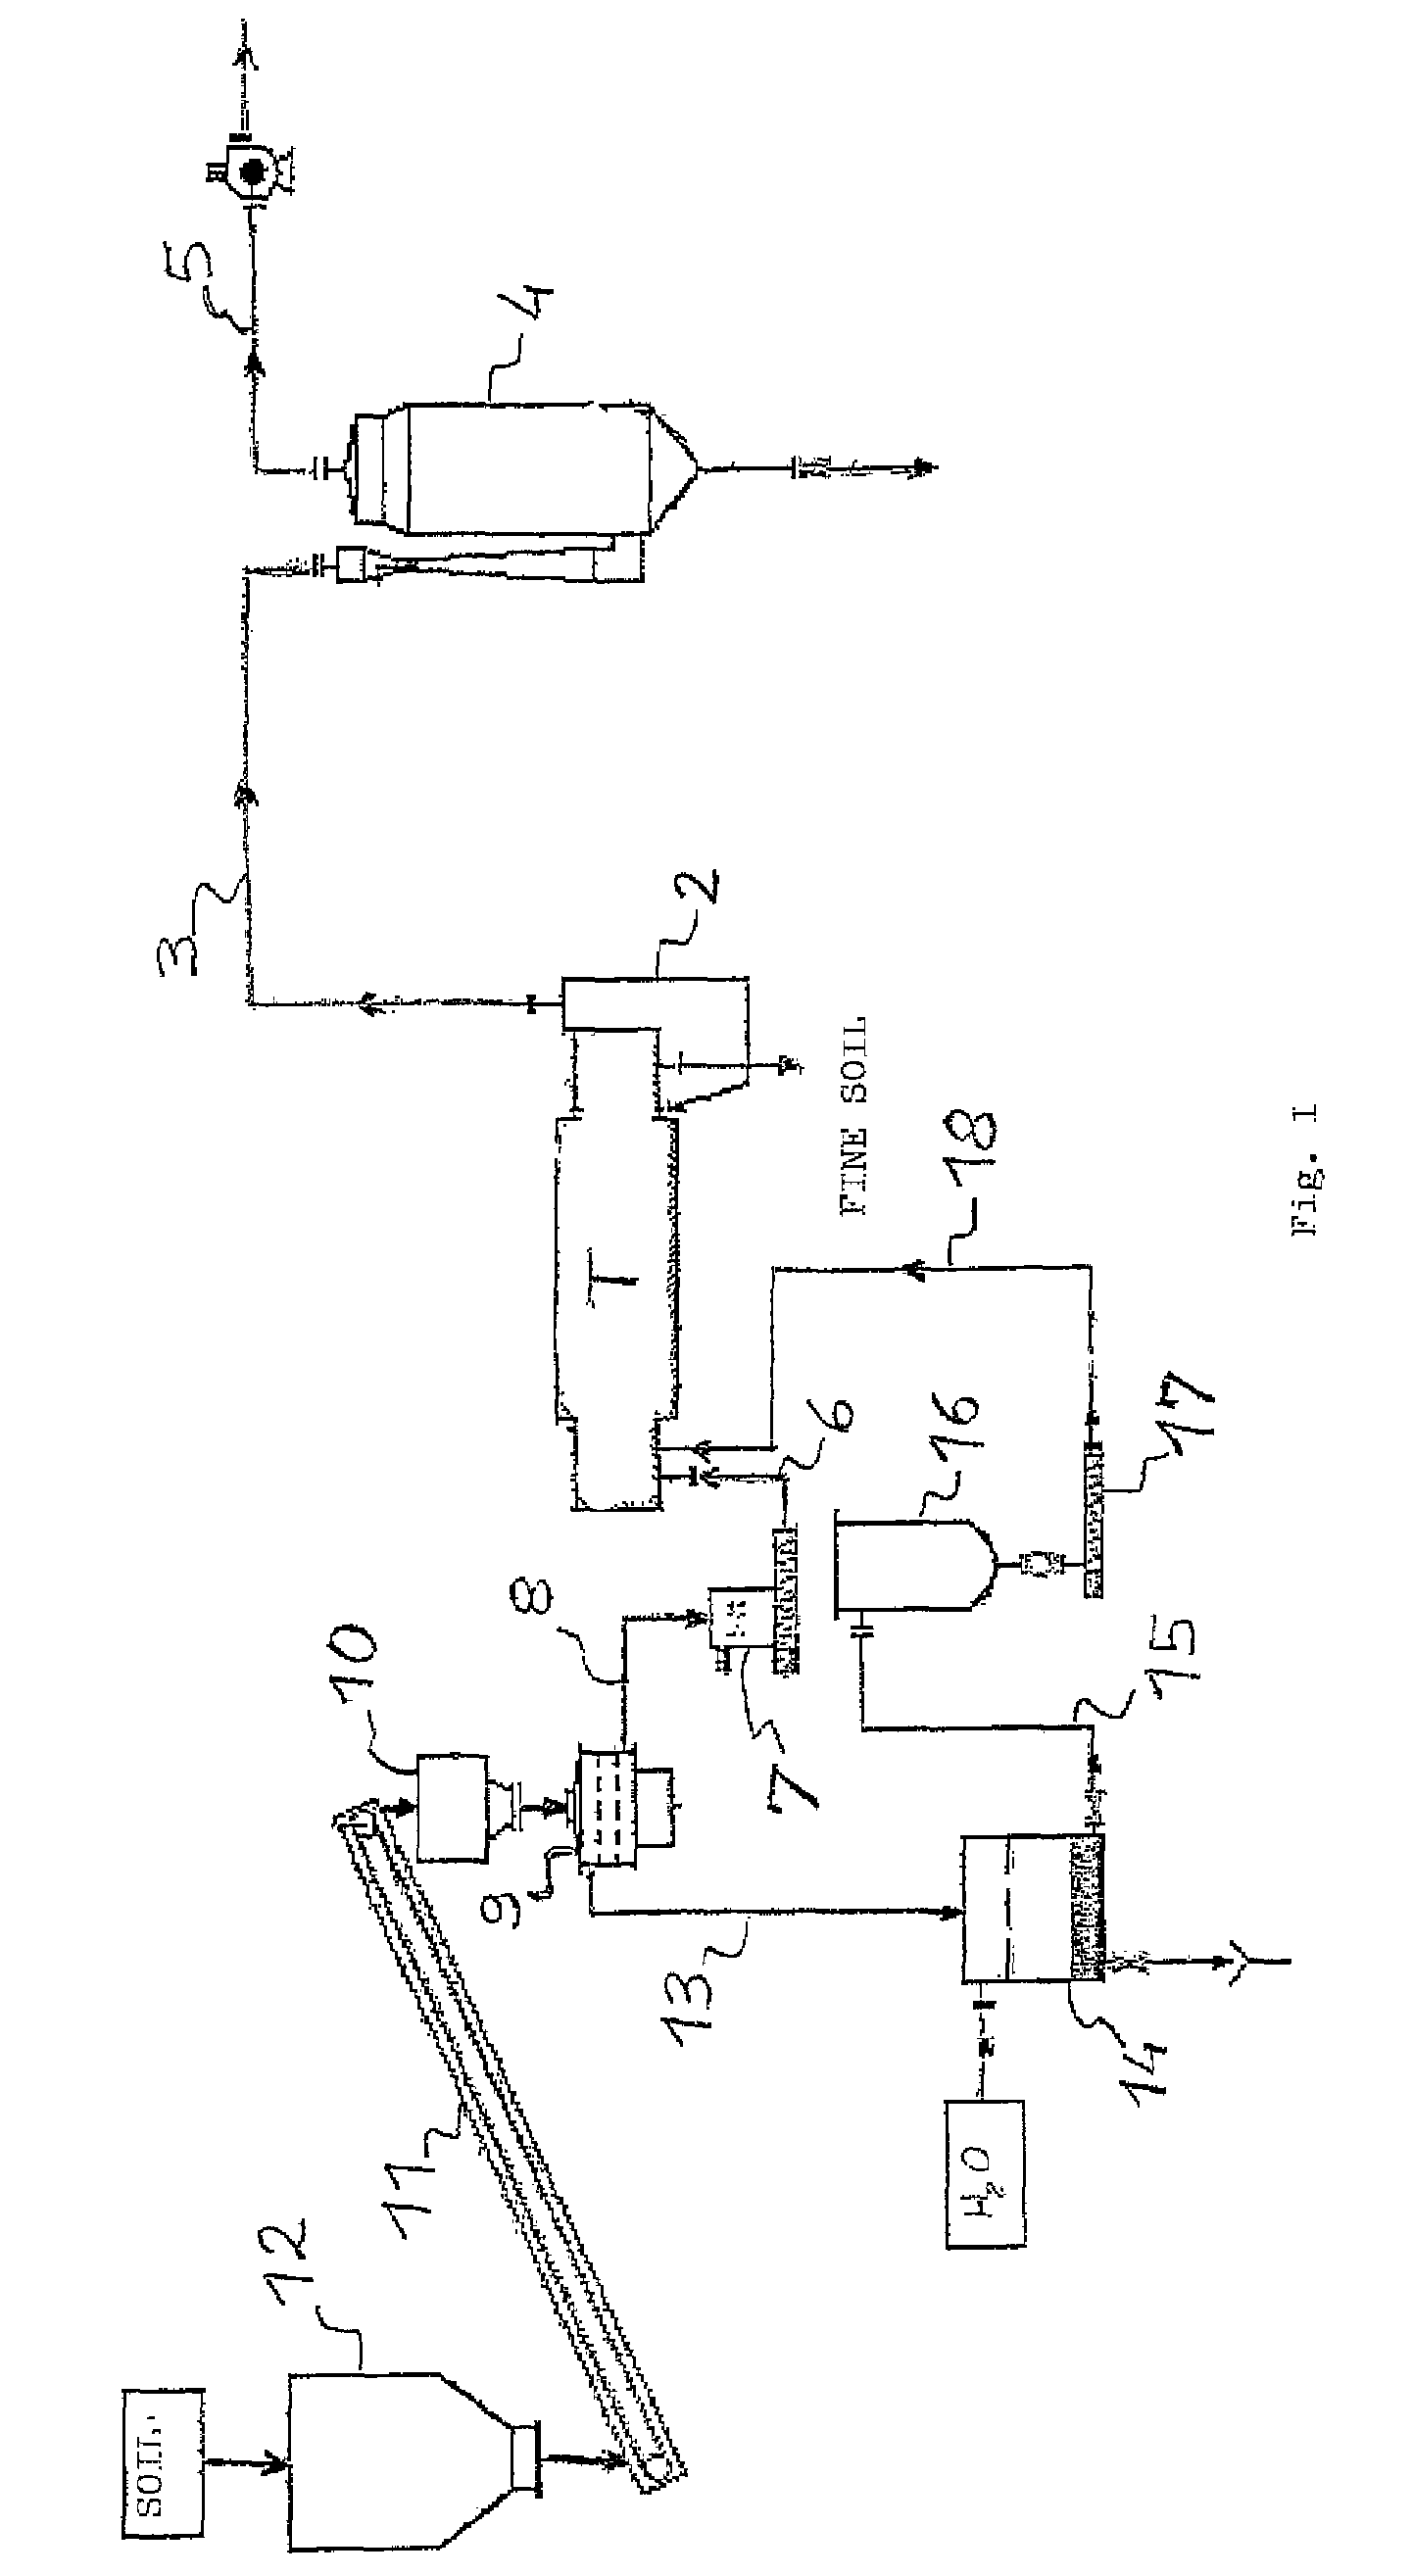 Method of remediating soil contaminated with polyhalogenated hydrocarbons